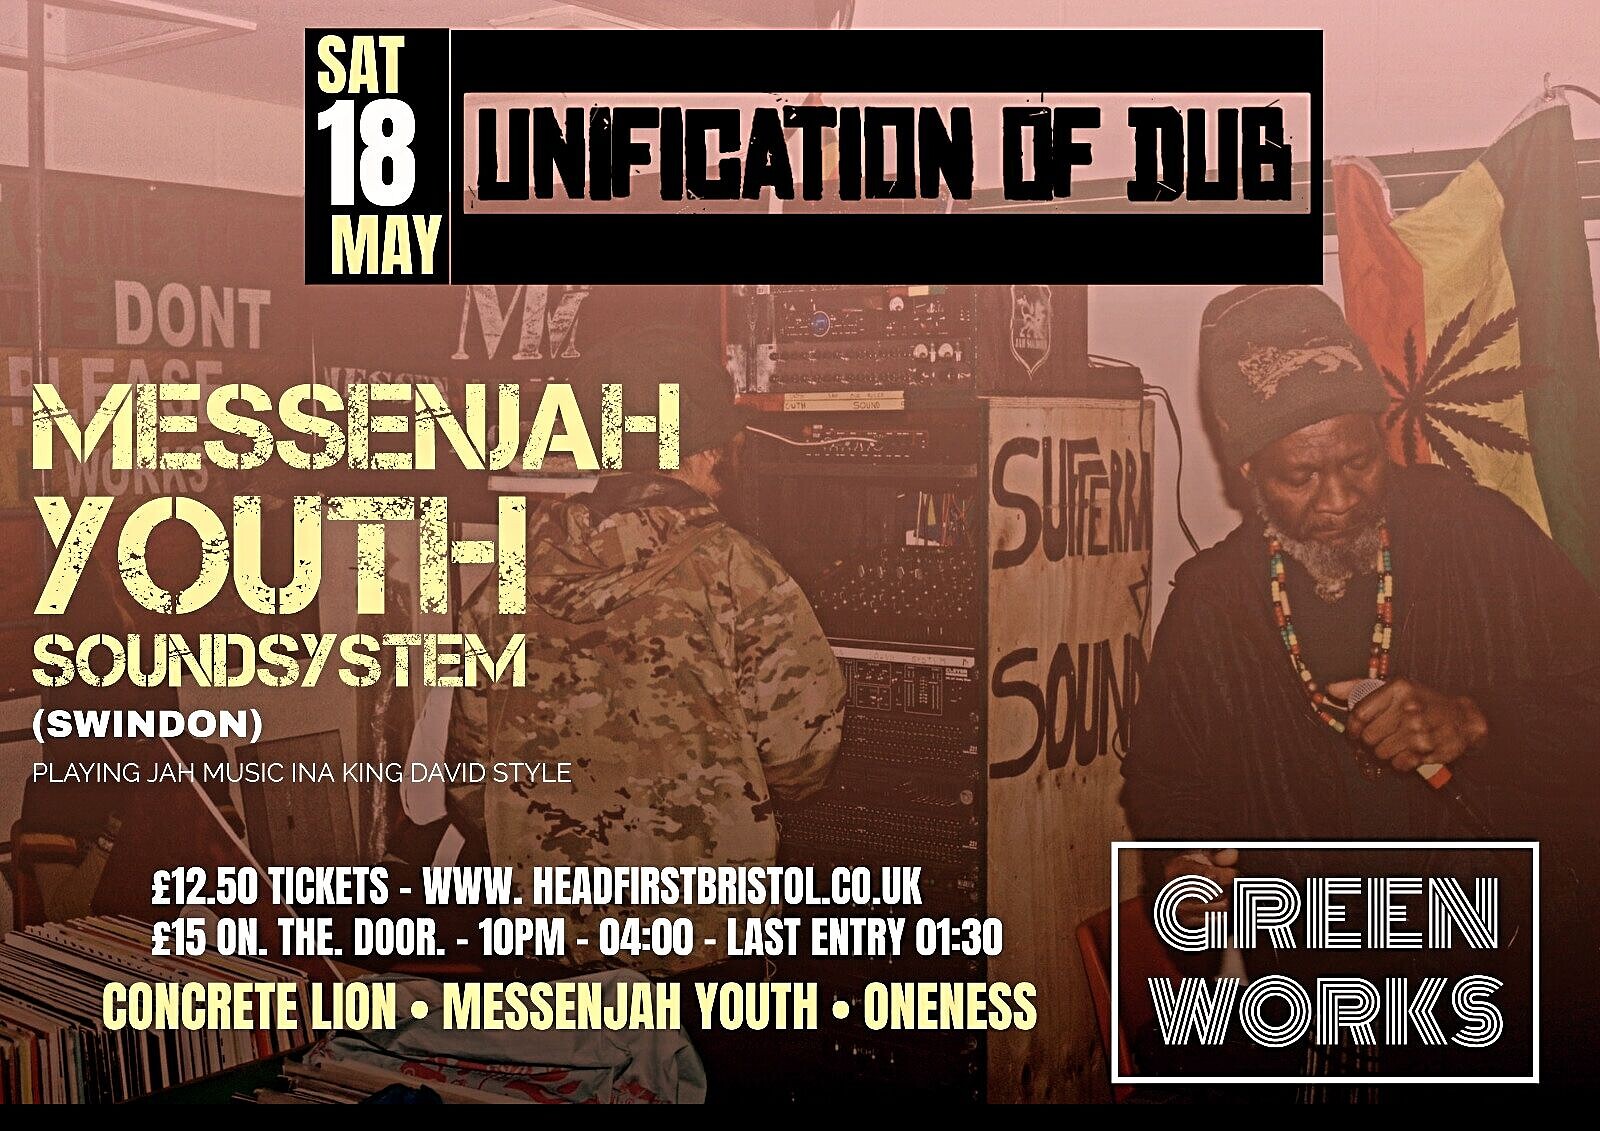 UNIFICATION OF DUB at Green Works